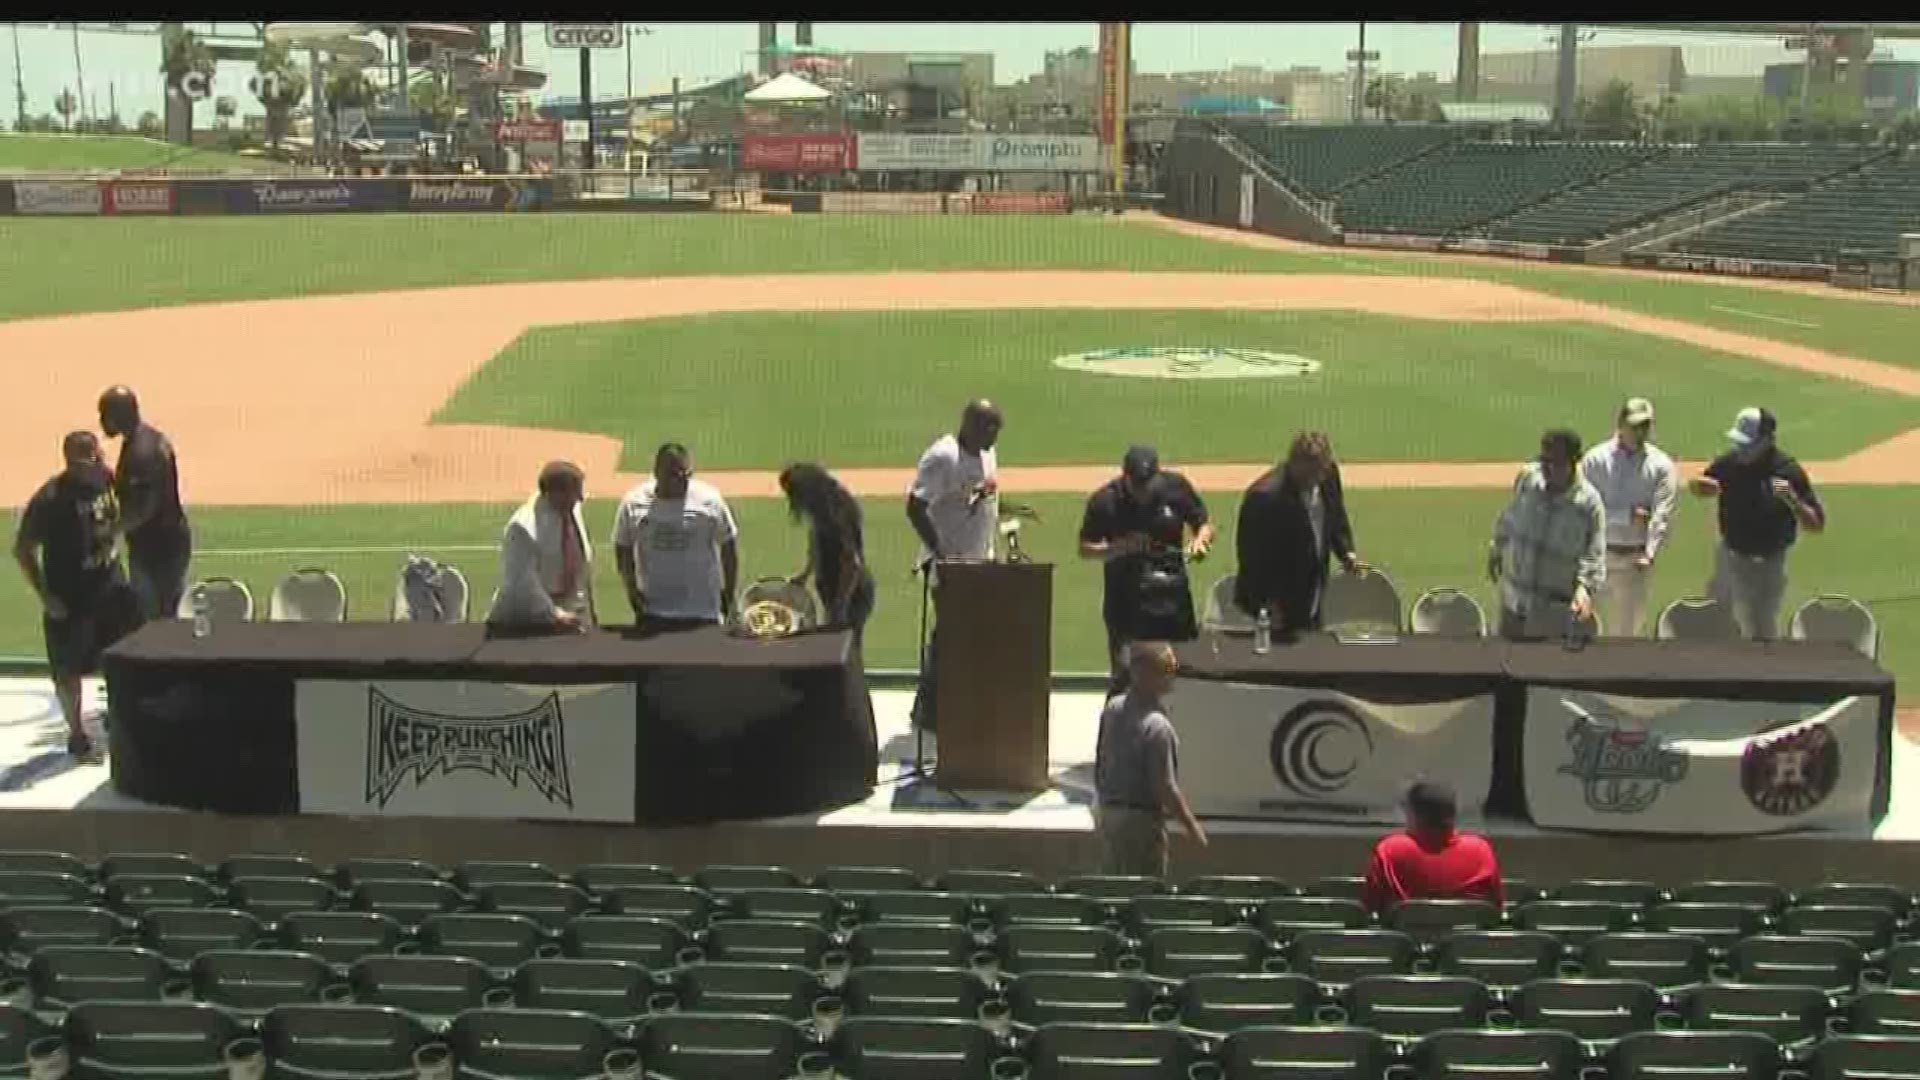 Knock it out of the park boxing event at Whataburger Field